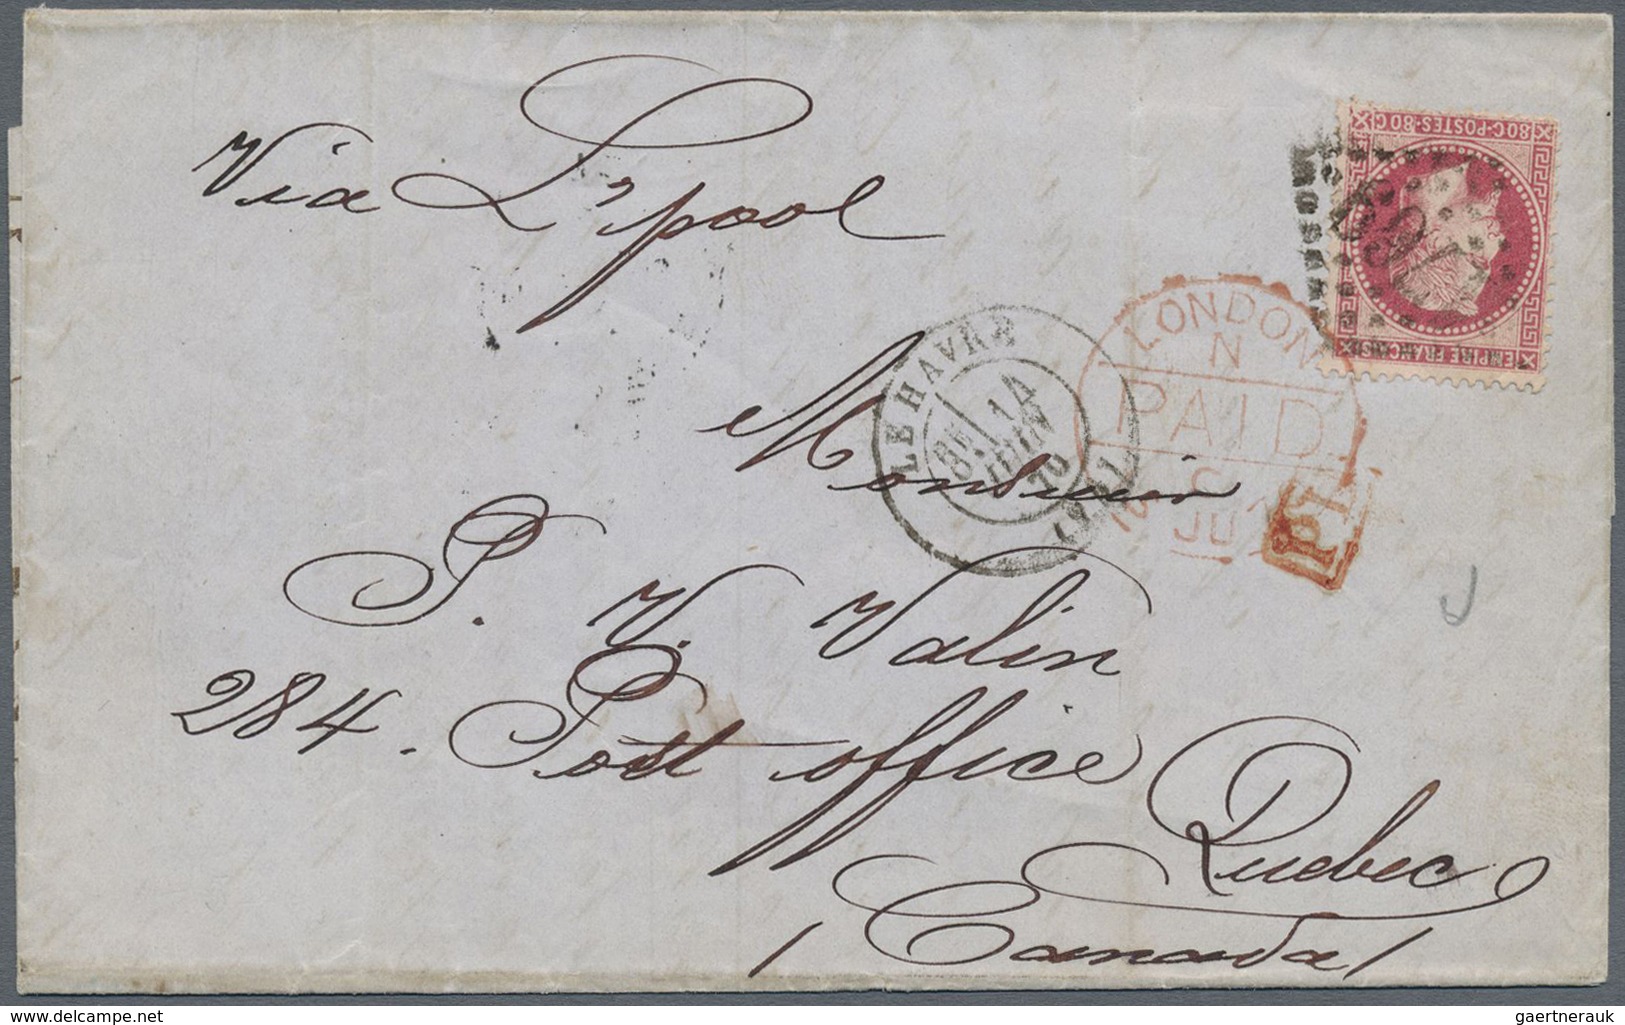 Br Frankreich: 1857/1956, Mail to Canada (incl. a few vice versa), holding of nearly 150 covers/cards,